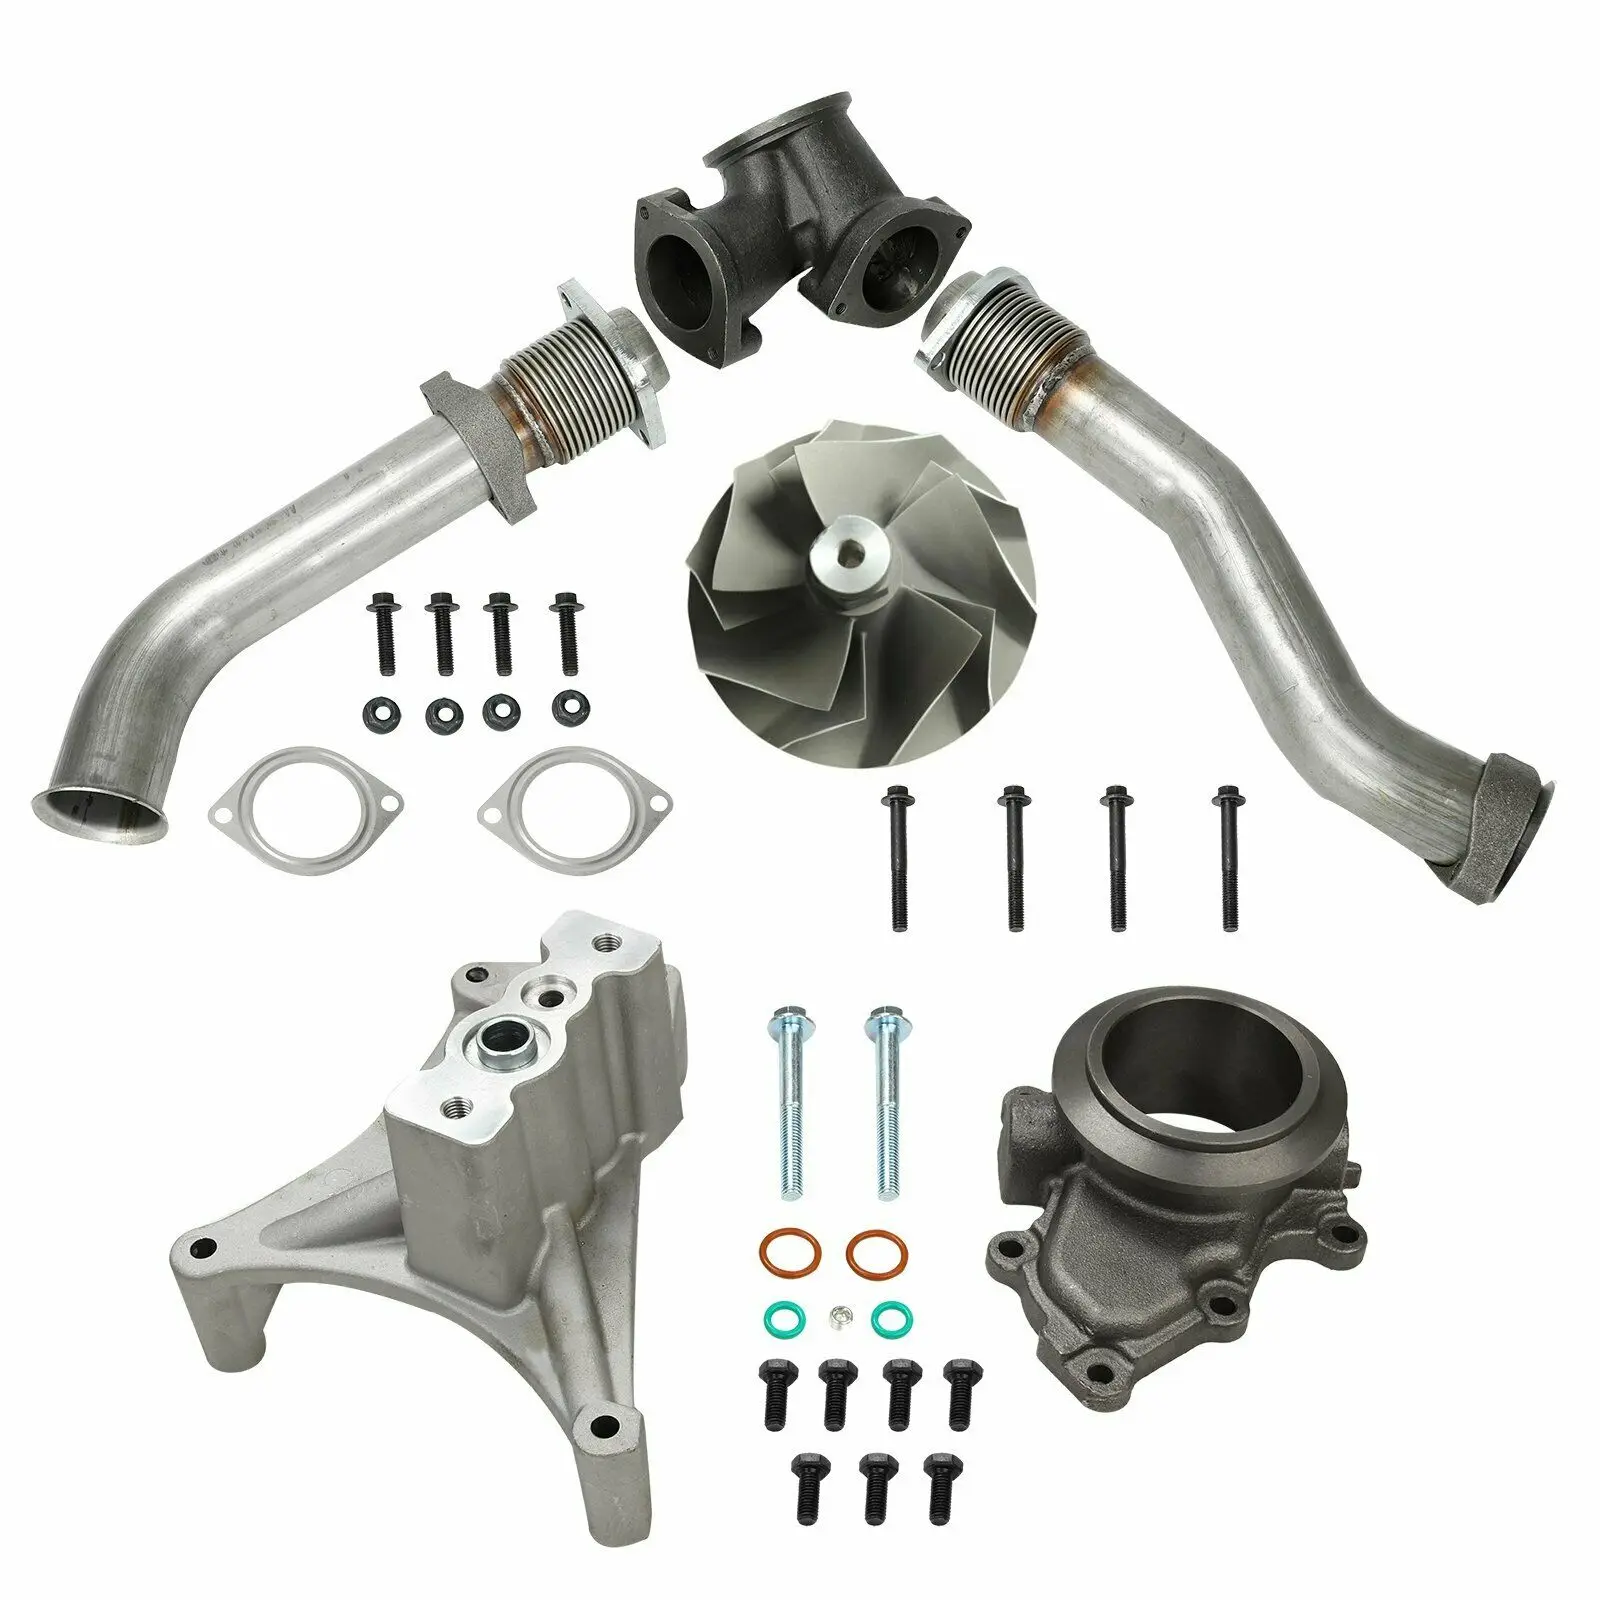 

High Quality Fit Ford 7.3 Powerstroke Diesel 99.5-03 Bellowed Up Pipes+Housing&Turbo Pedestal